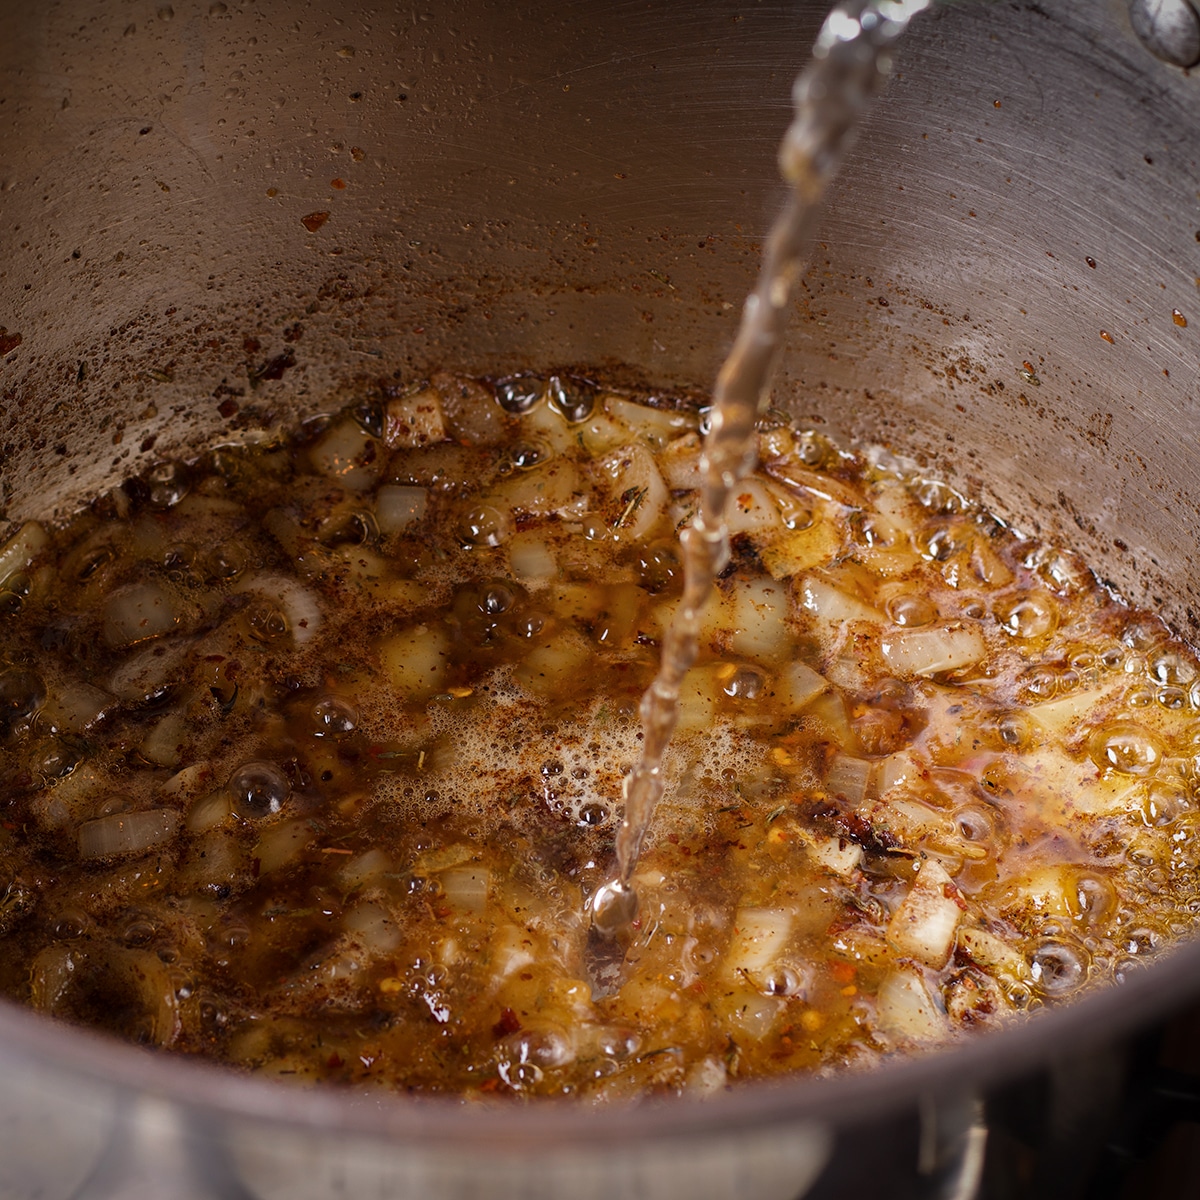 Pouring white wine into a saucepan with cooking onions, garlic, and spices.